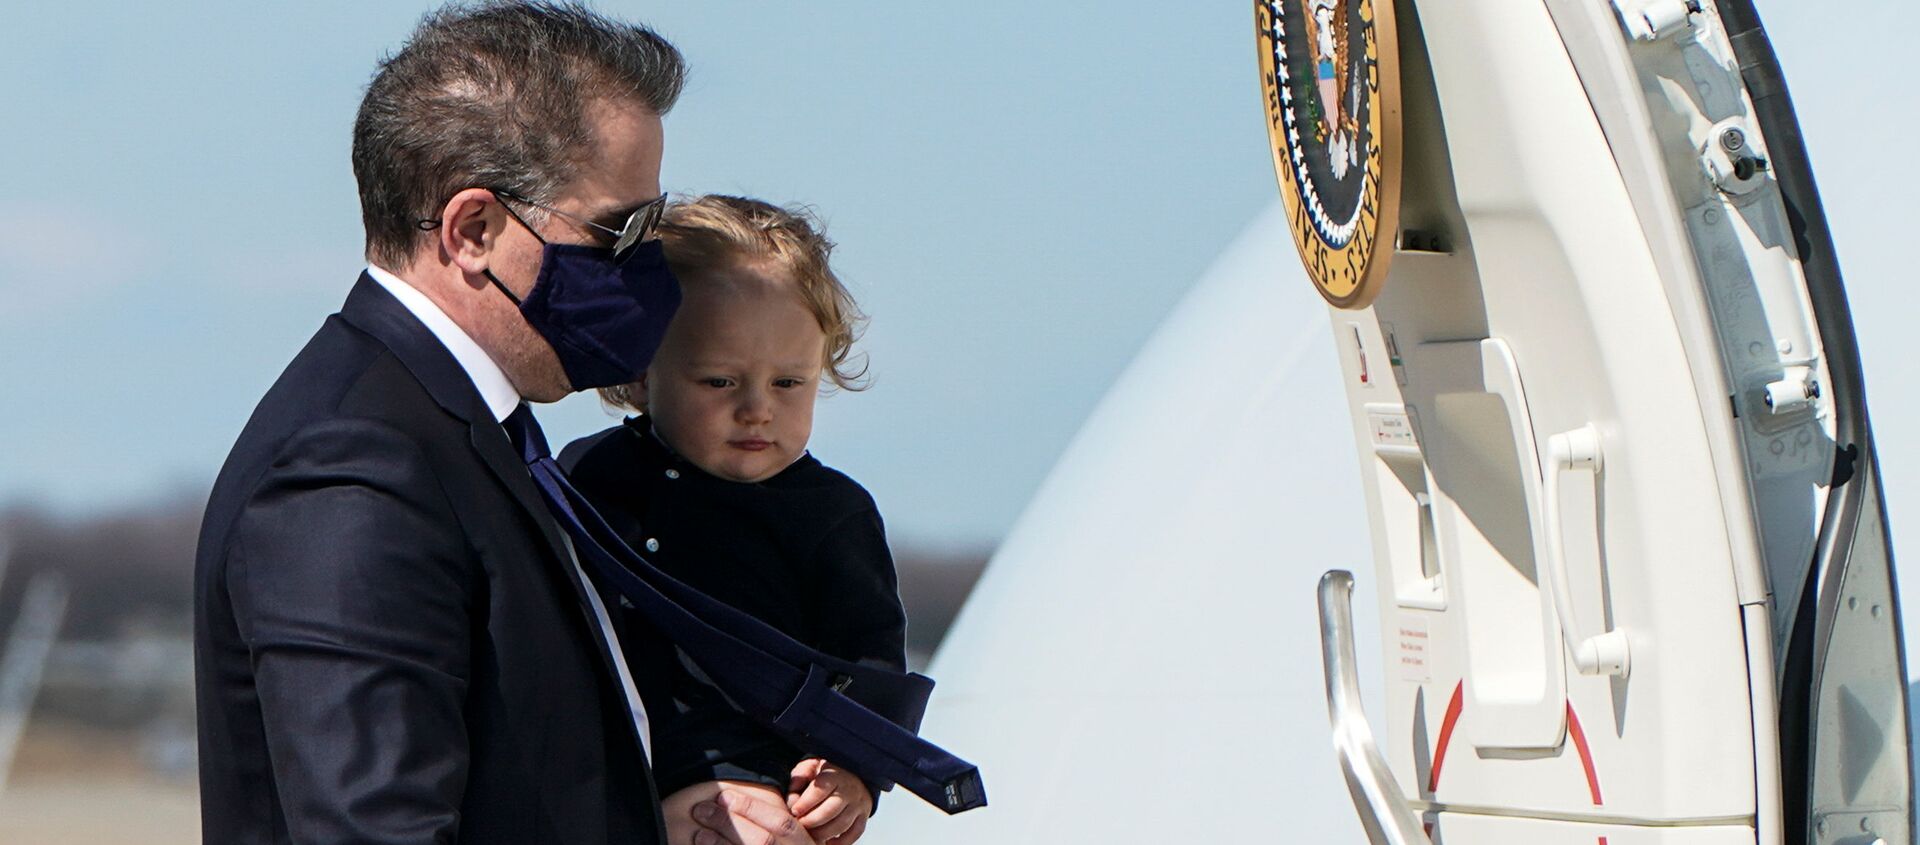 Hunter Biden, son of U.S. President Joe Biden, carries his son Beau to board Air Force One as they depart Washington for travel with President Biden to Wiilmington, Delaware at Joint Base Andrews, Maryland, U.S., March 26, 2021. - Sputnik International, 1920, 31.03.2021